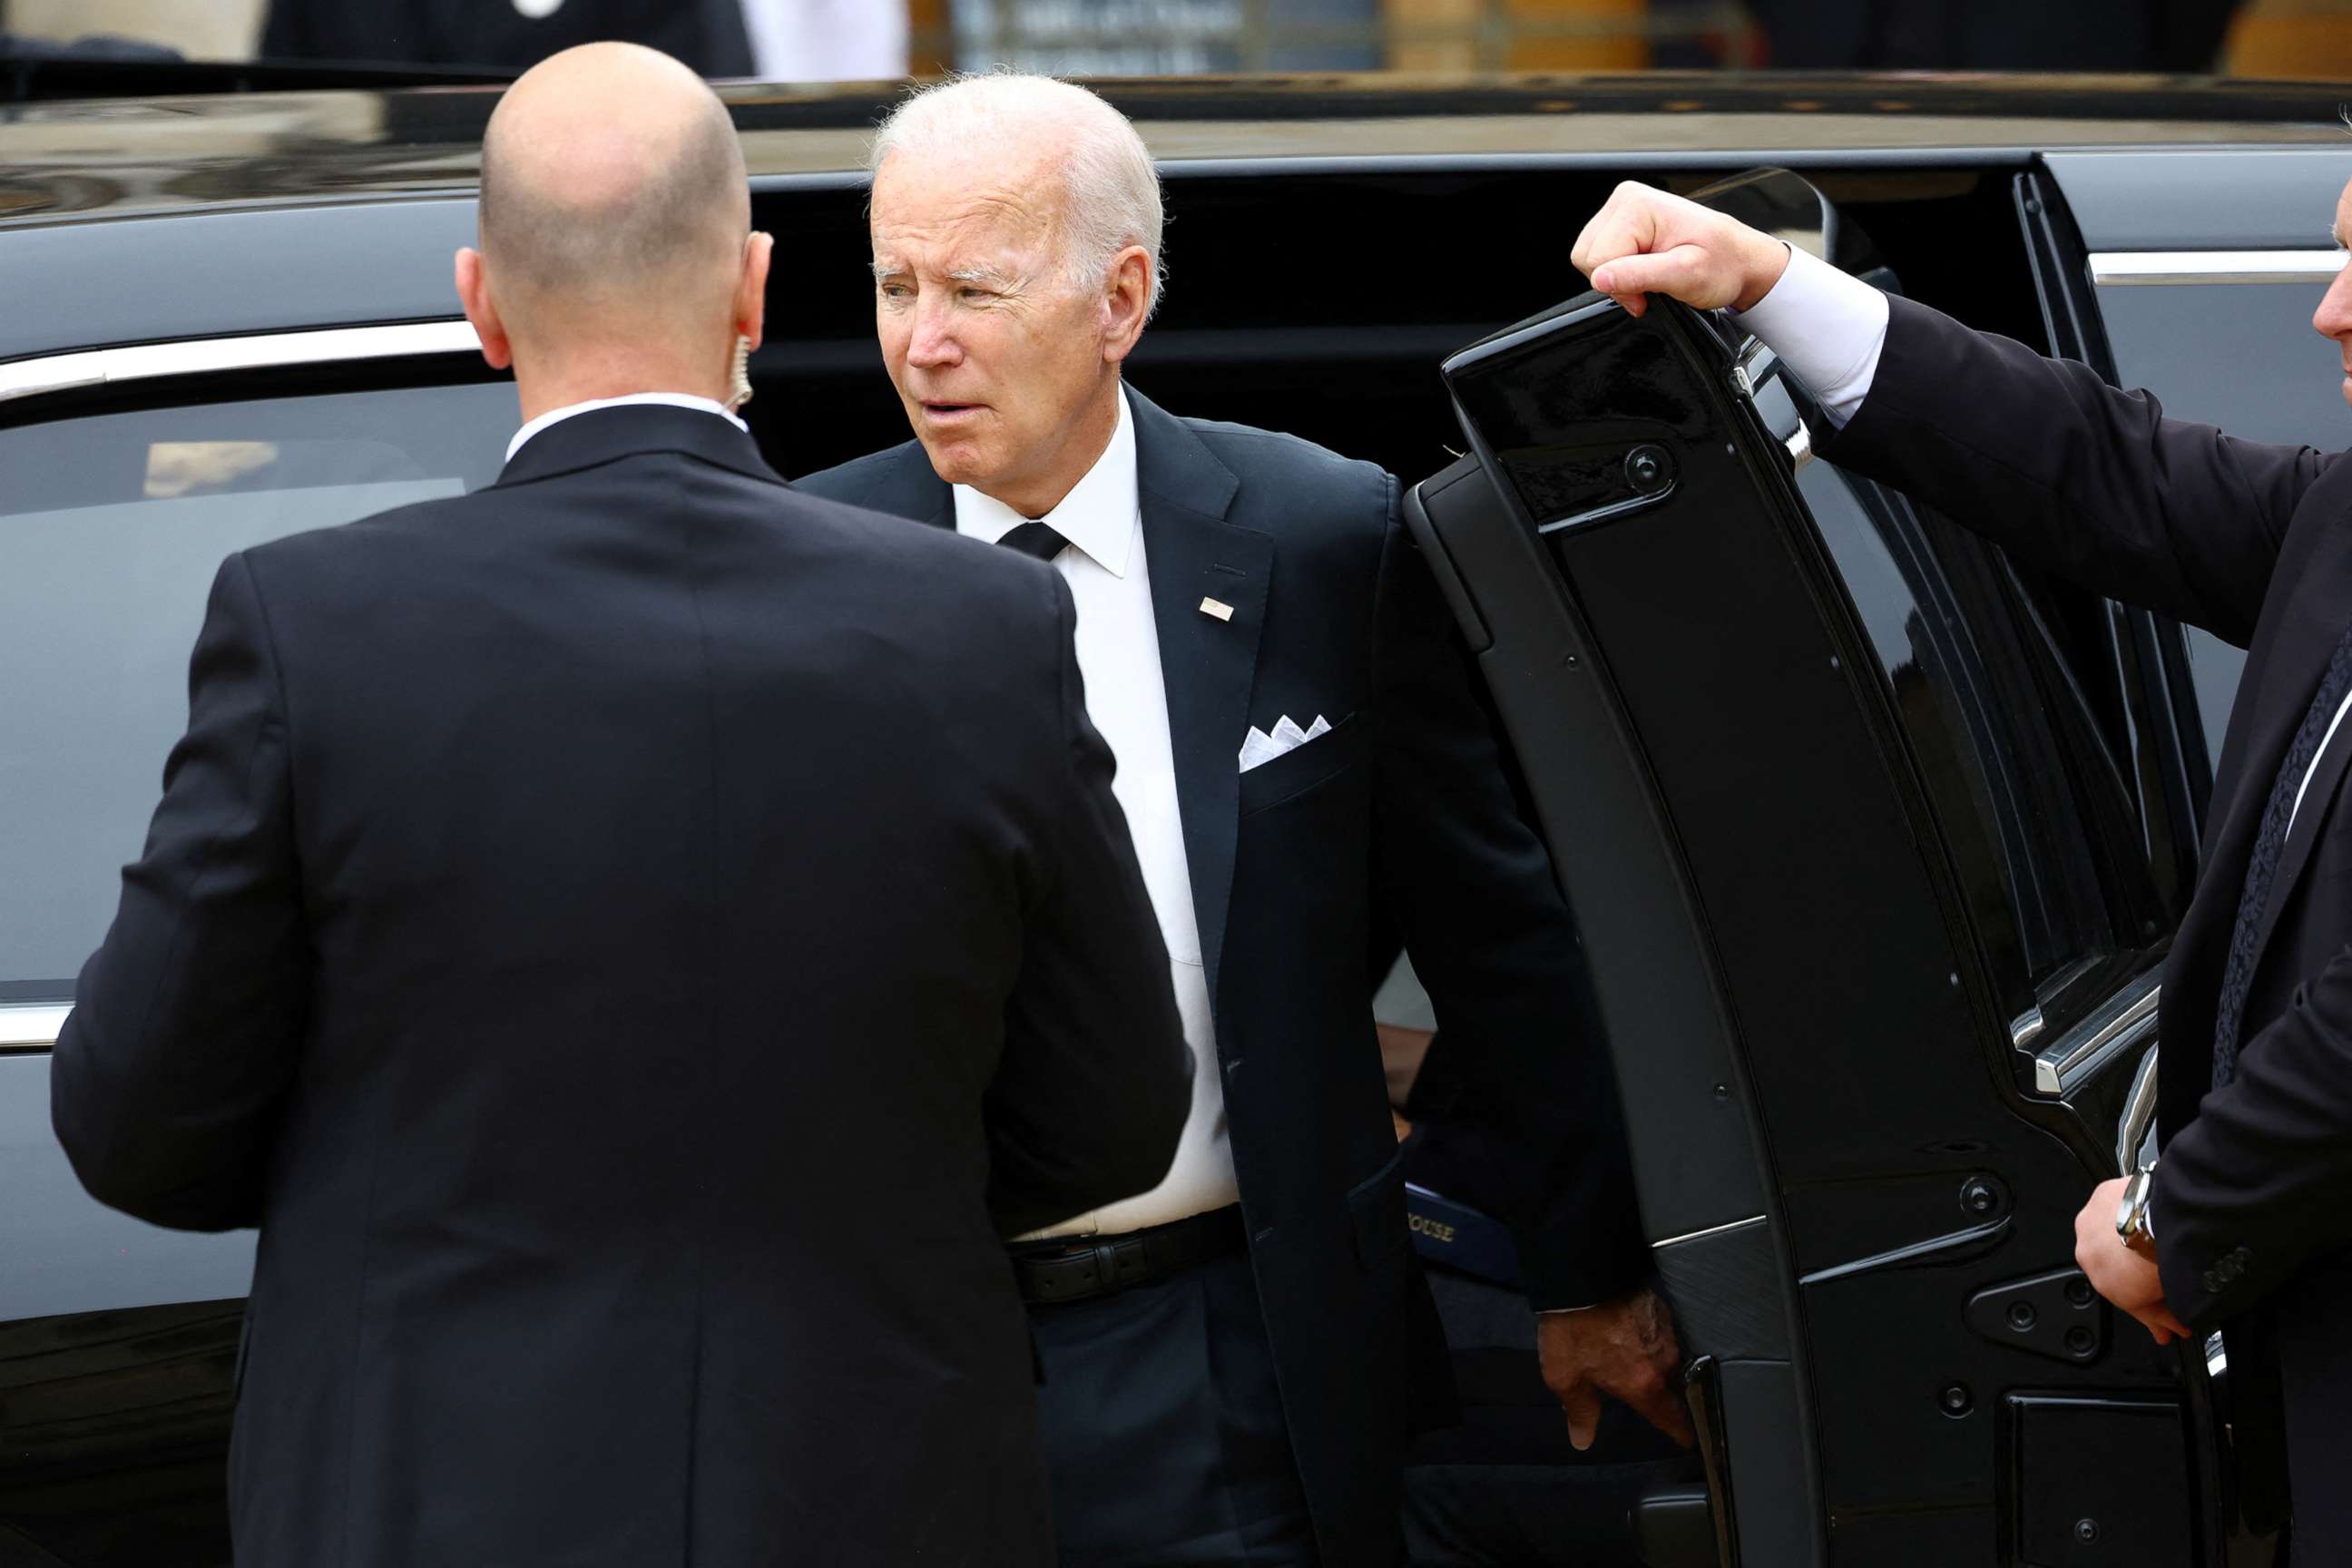 PHOTO: President Joe Biden arrives for the State Funeral of Queen Elizabeth II at Westminster Abbey on Sept. 19, 2022 in London.